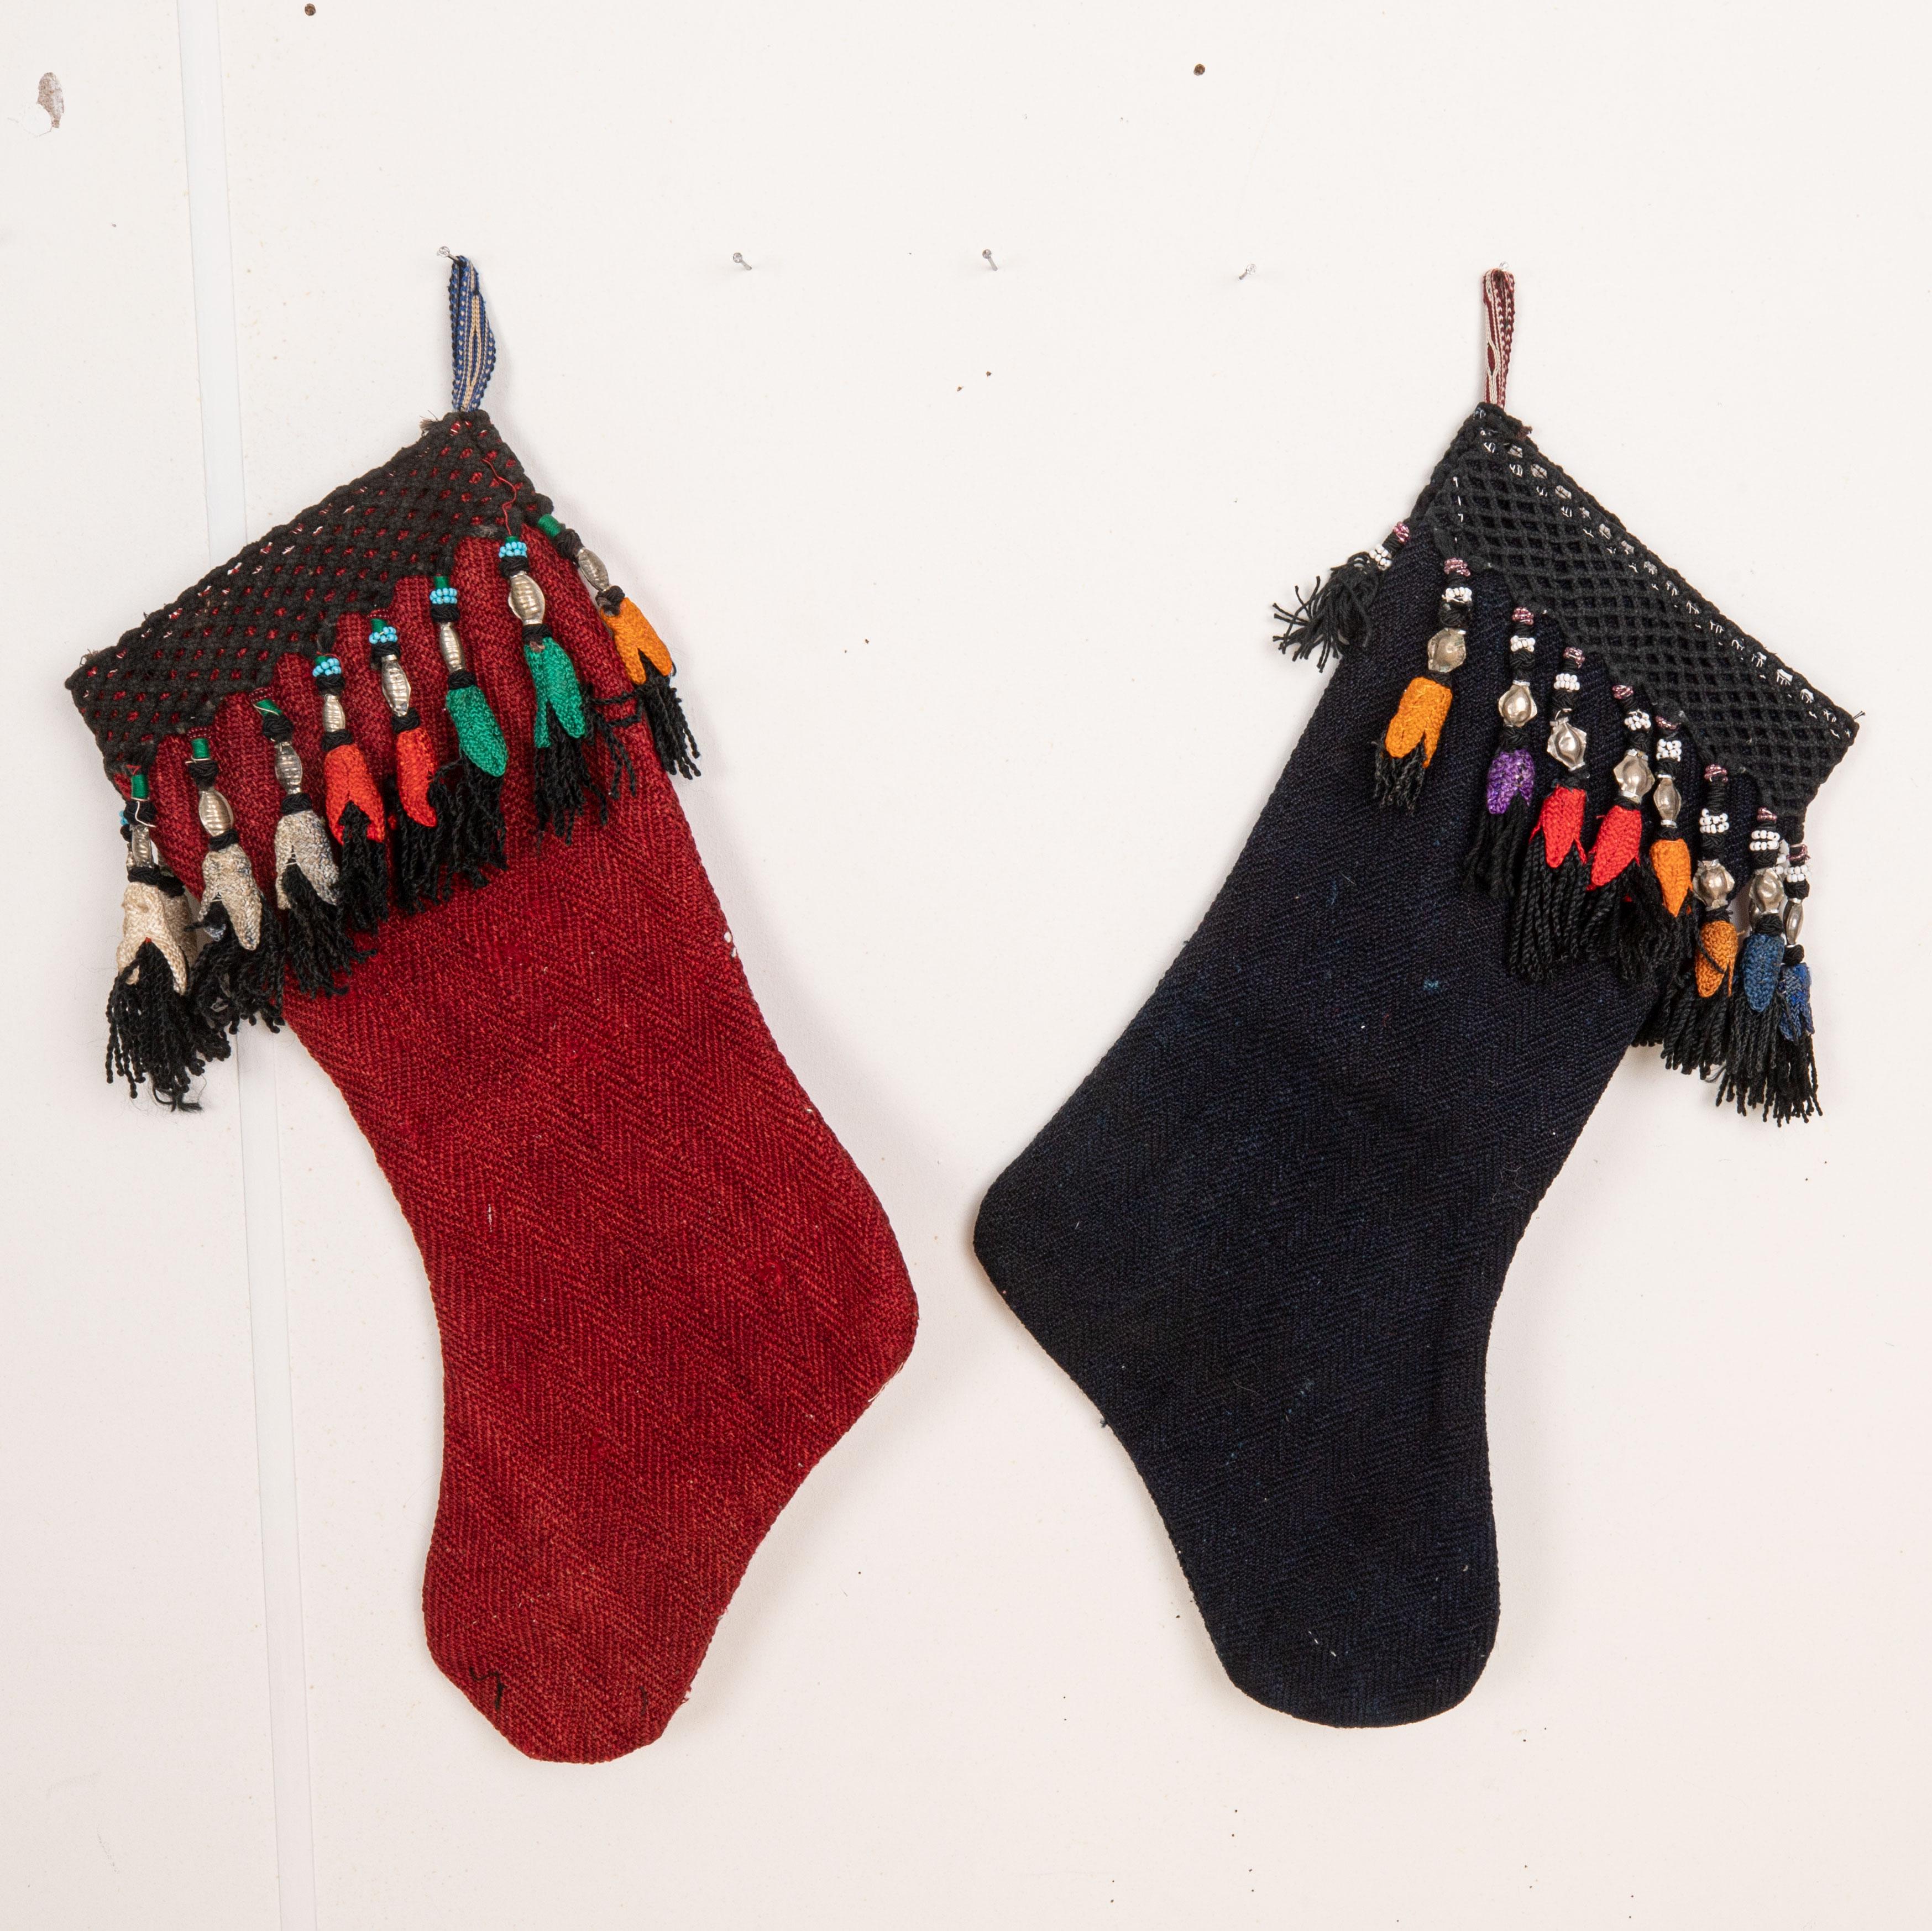 These Christmas Stockings were made from mid 20th C. Perde Cover Fragments.

Please note these were made from vintage Perde fragments.
